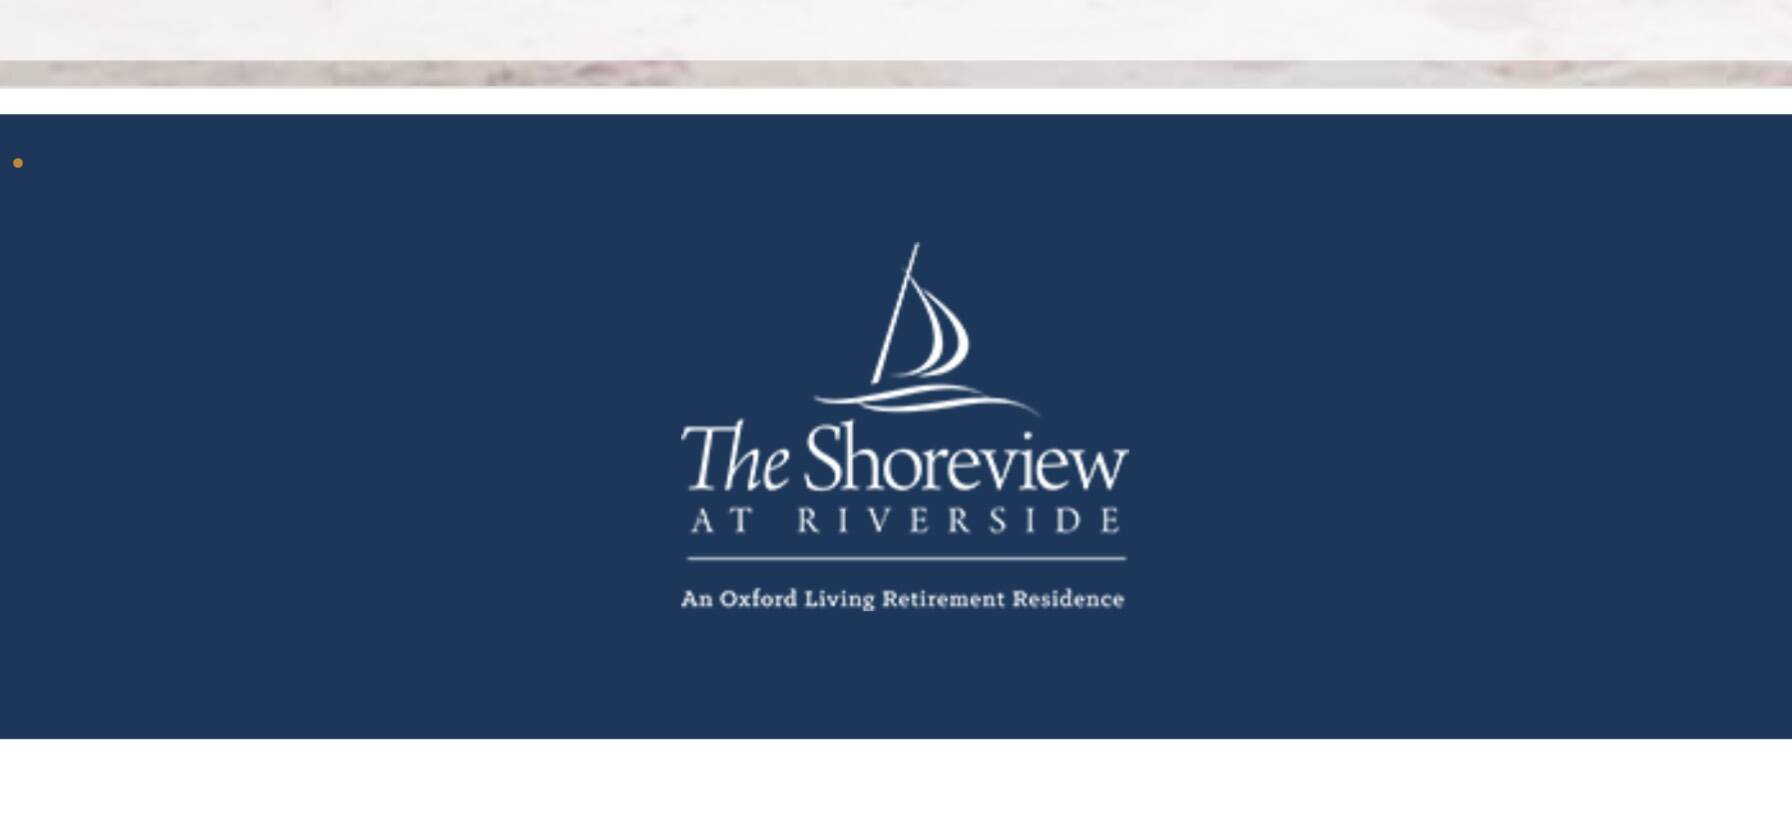 The Shoreview